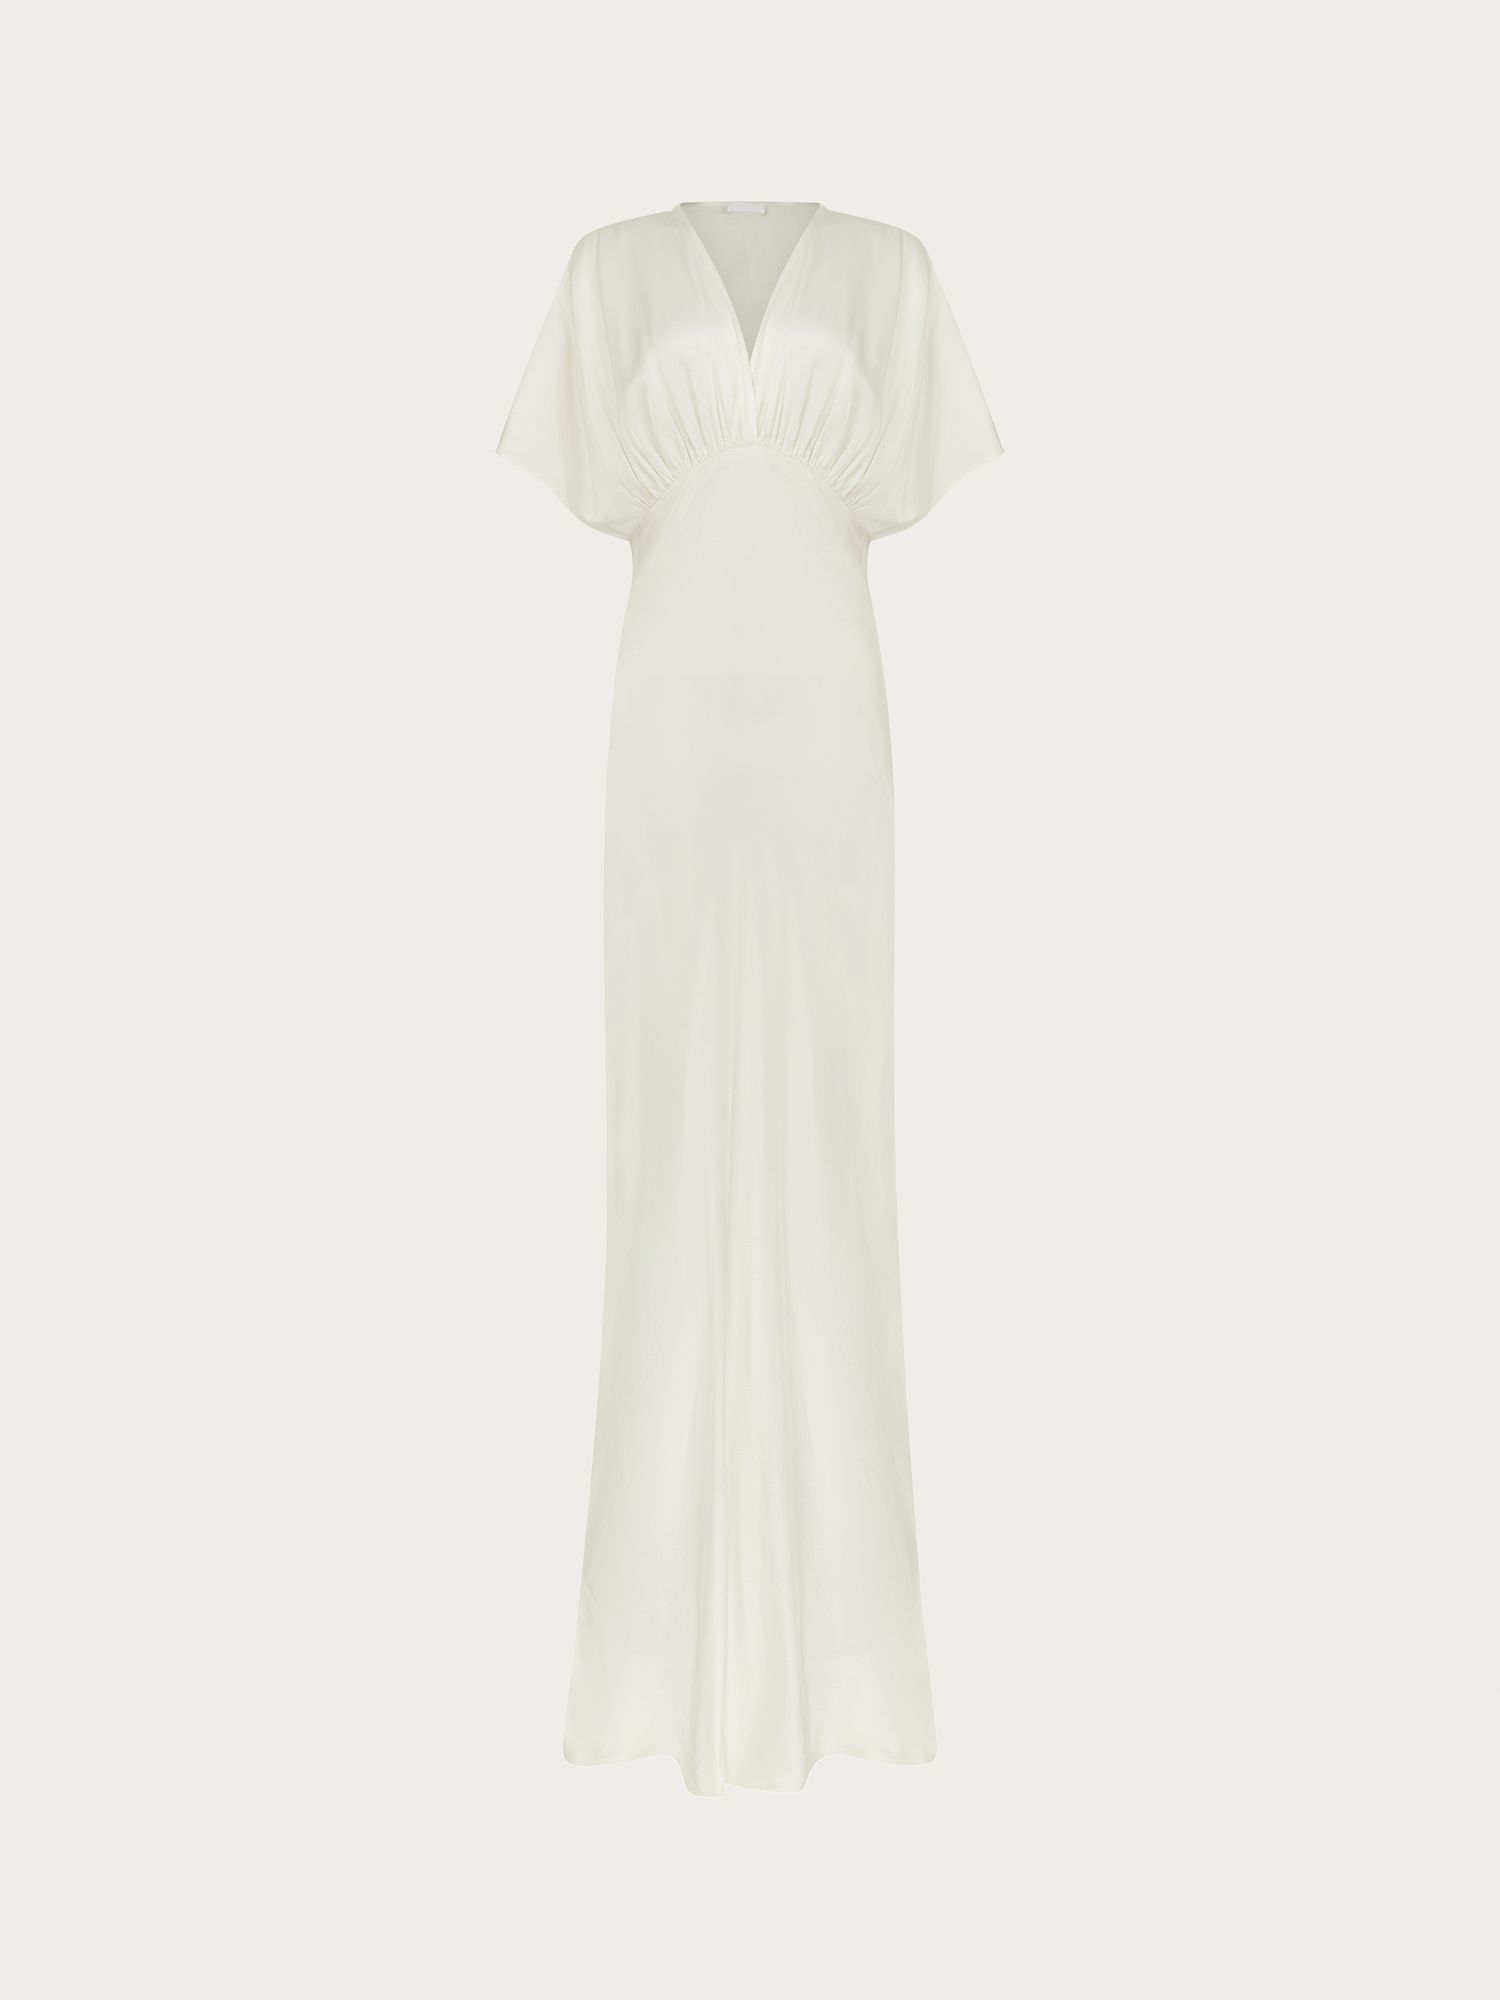 Ghost Collette Satin Wrap Neck Maxi Dress, Ivory at John Lewis & Partners